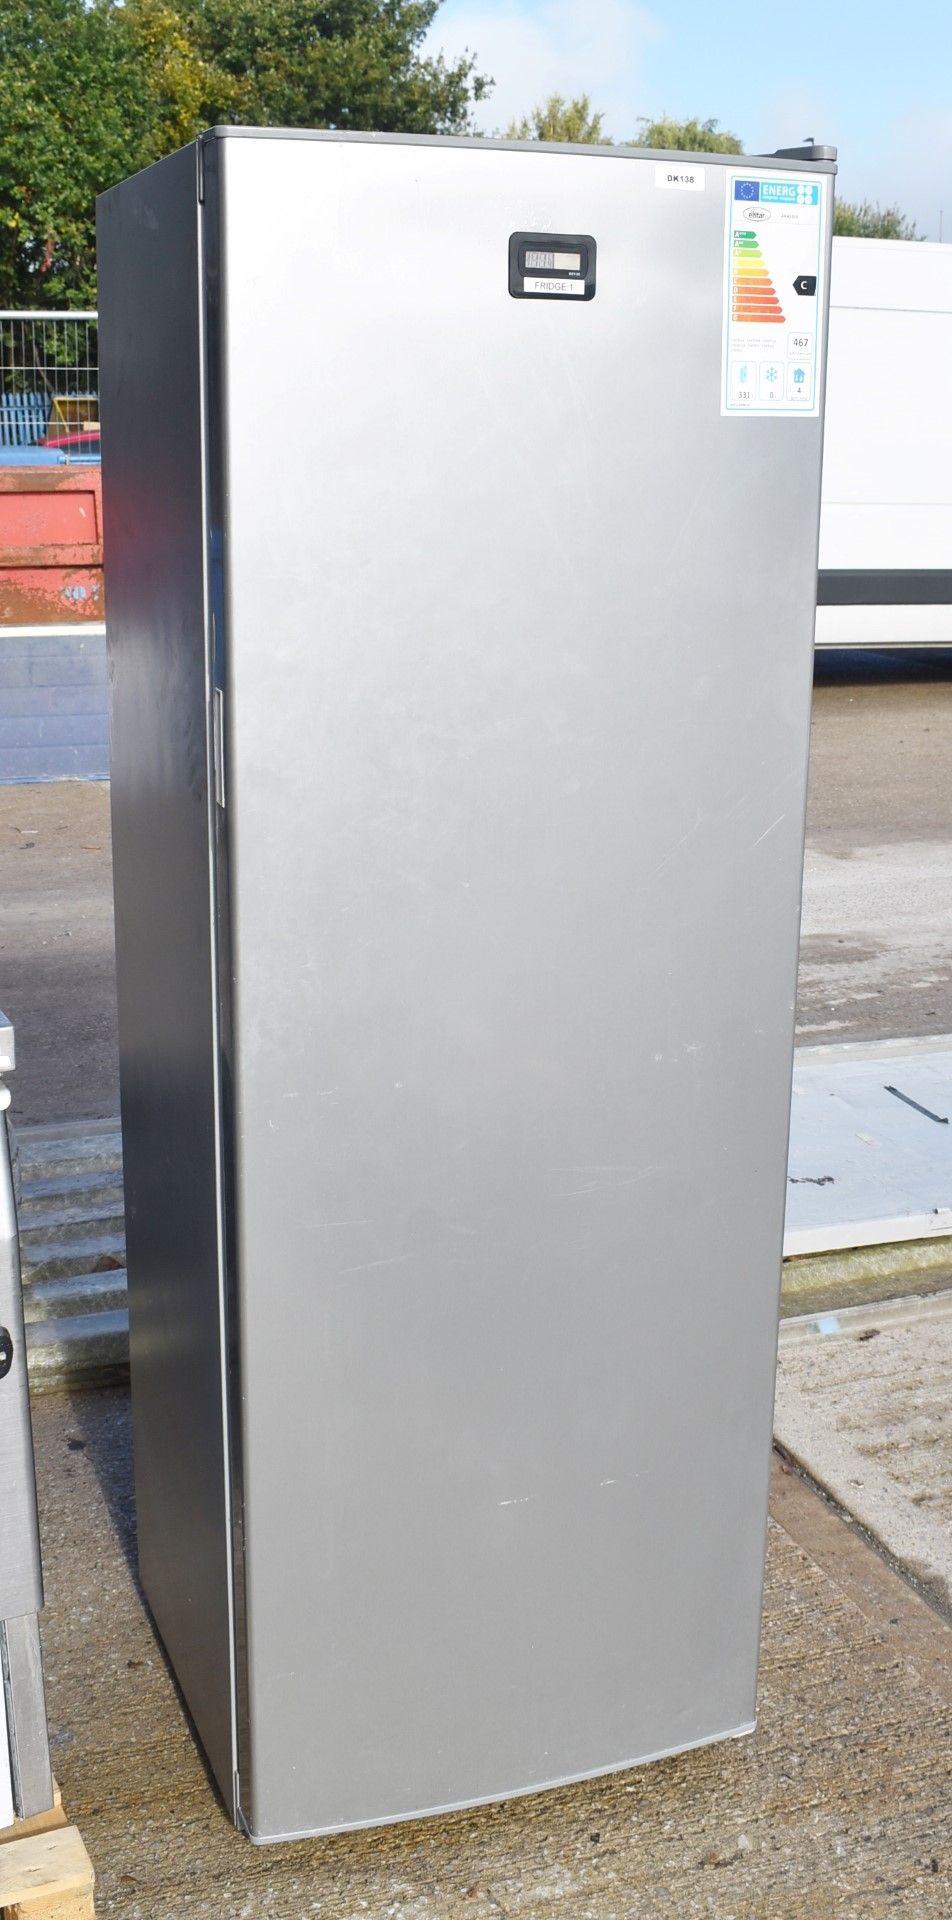 1 x Elstar Upright Commercial Refridgerator With Silver Finish - Model ARR350S - Image 6 of 8